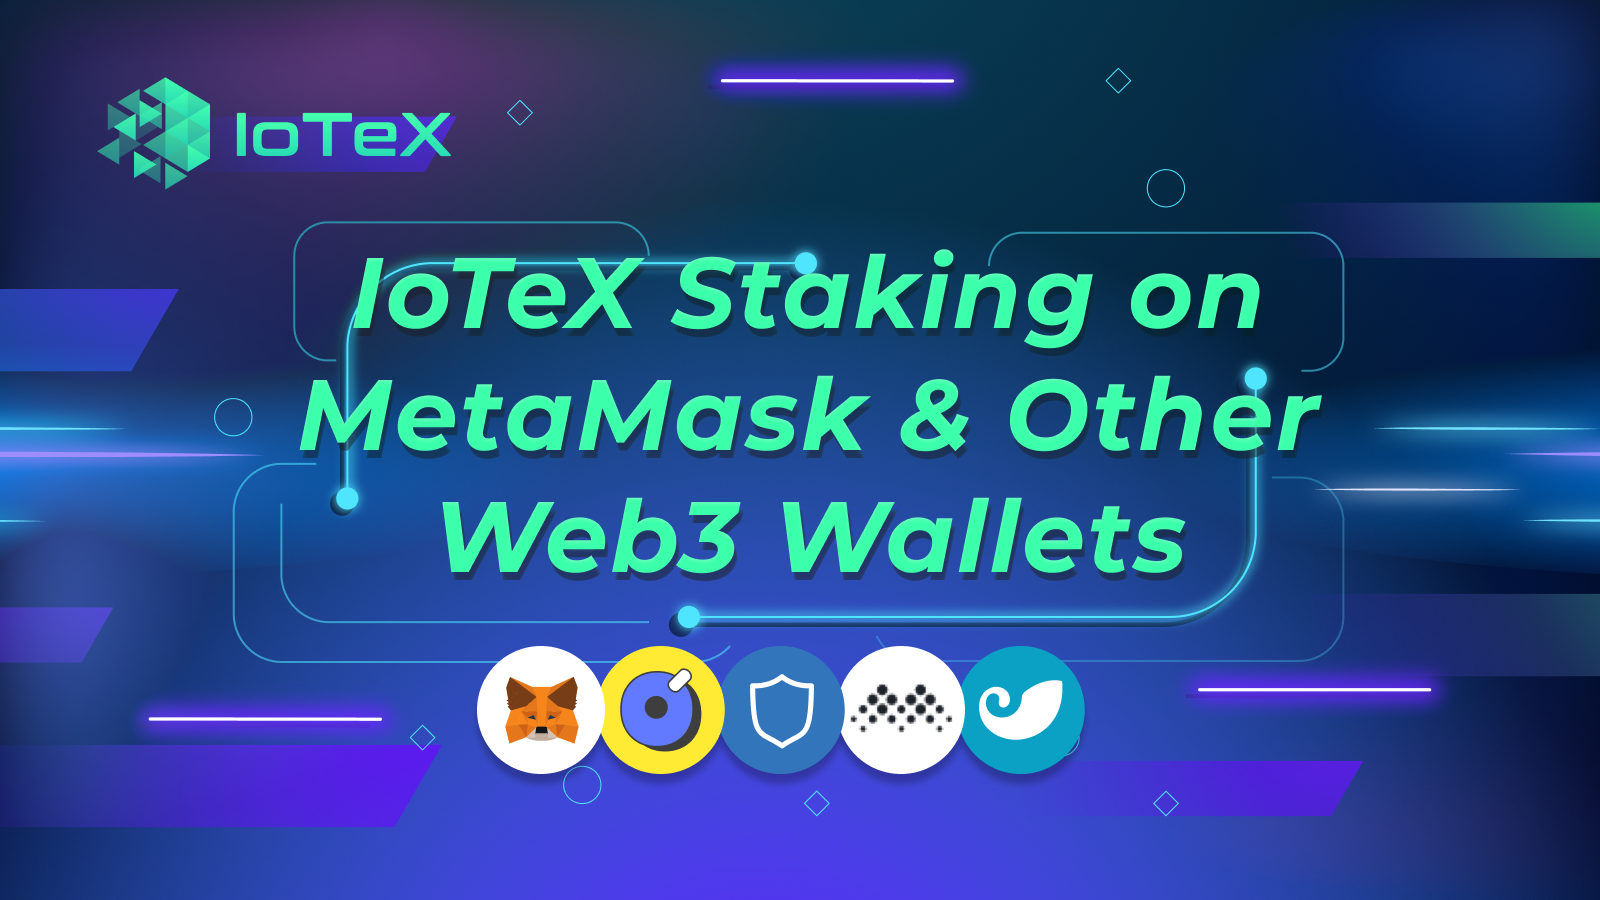 IoTeX Staking with Web3 Wallets